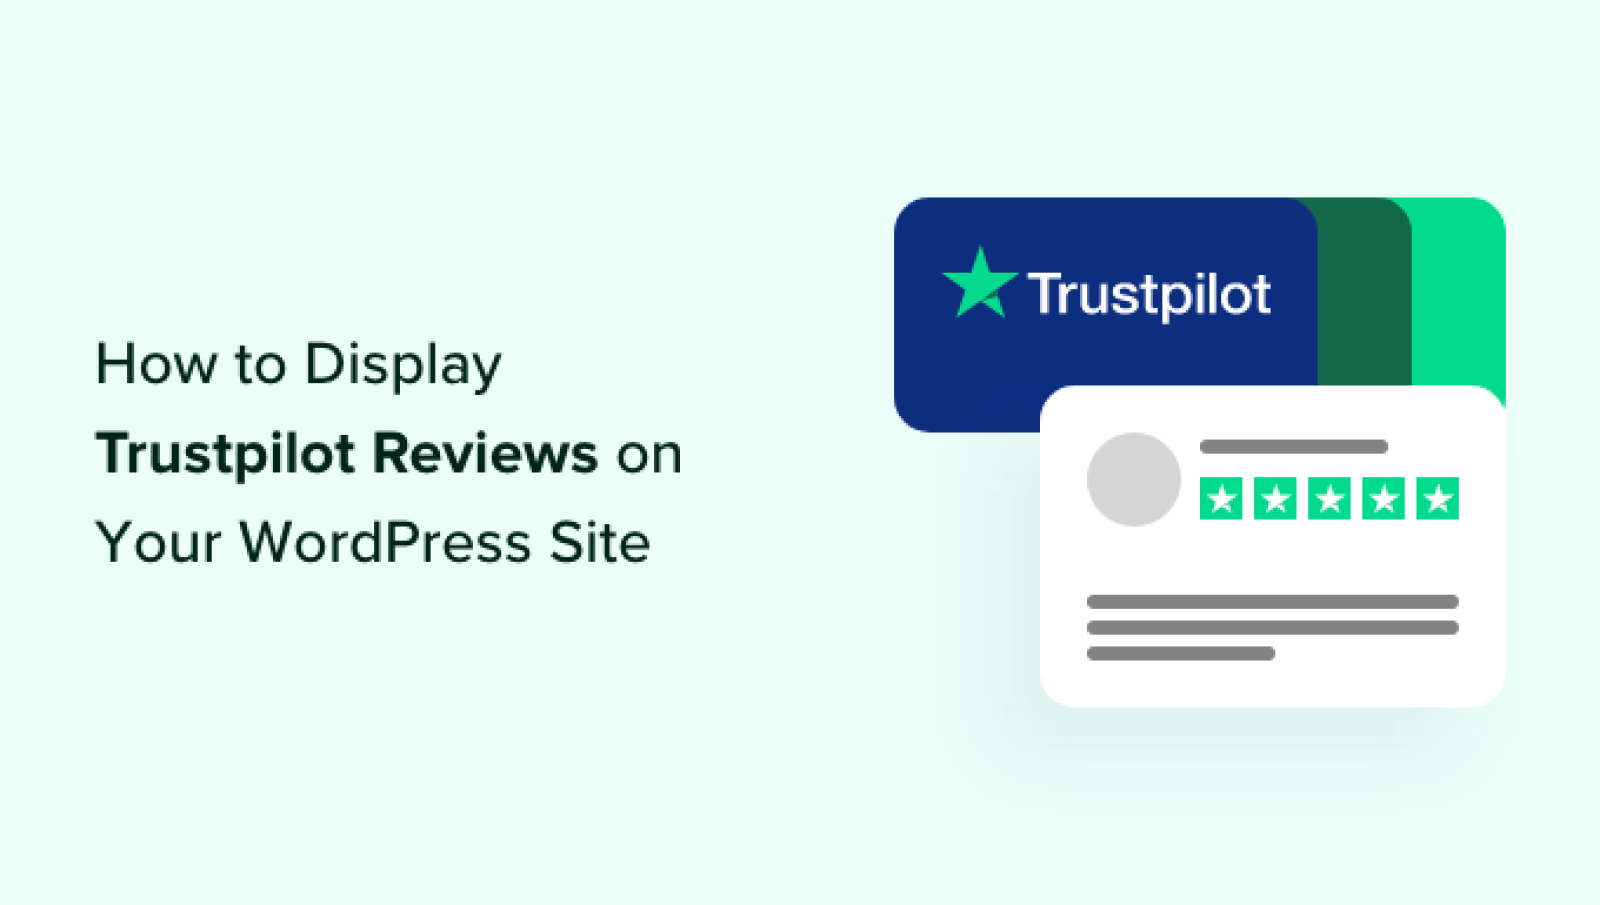 Tips on how to Show Trustpilot Opinions on Your WordPress Website